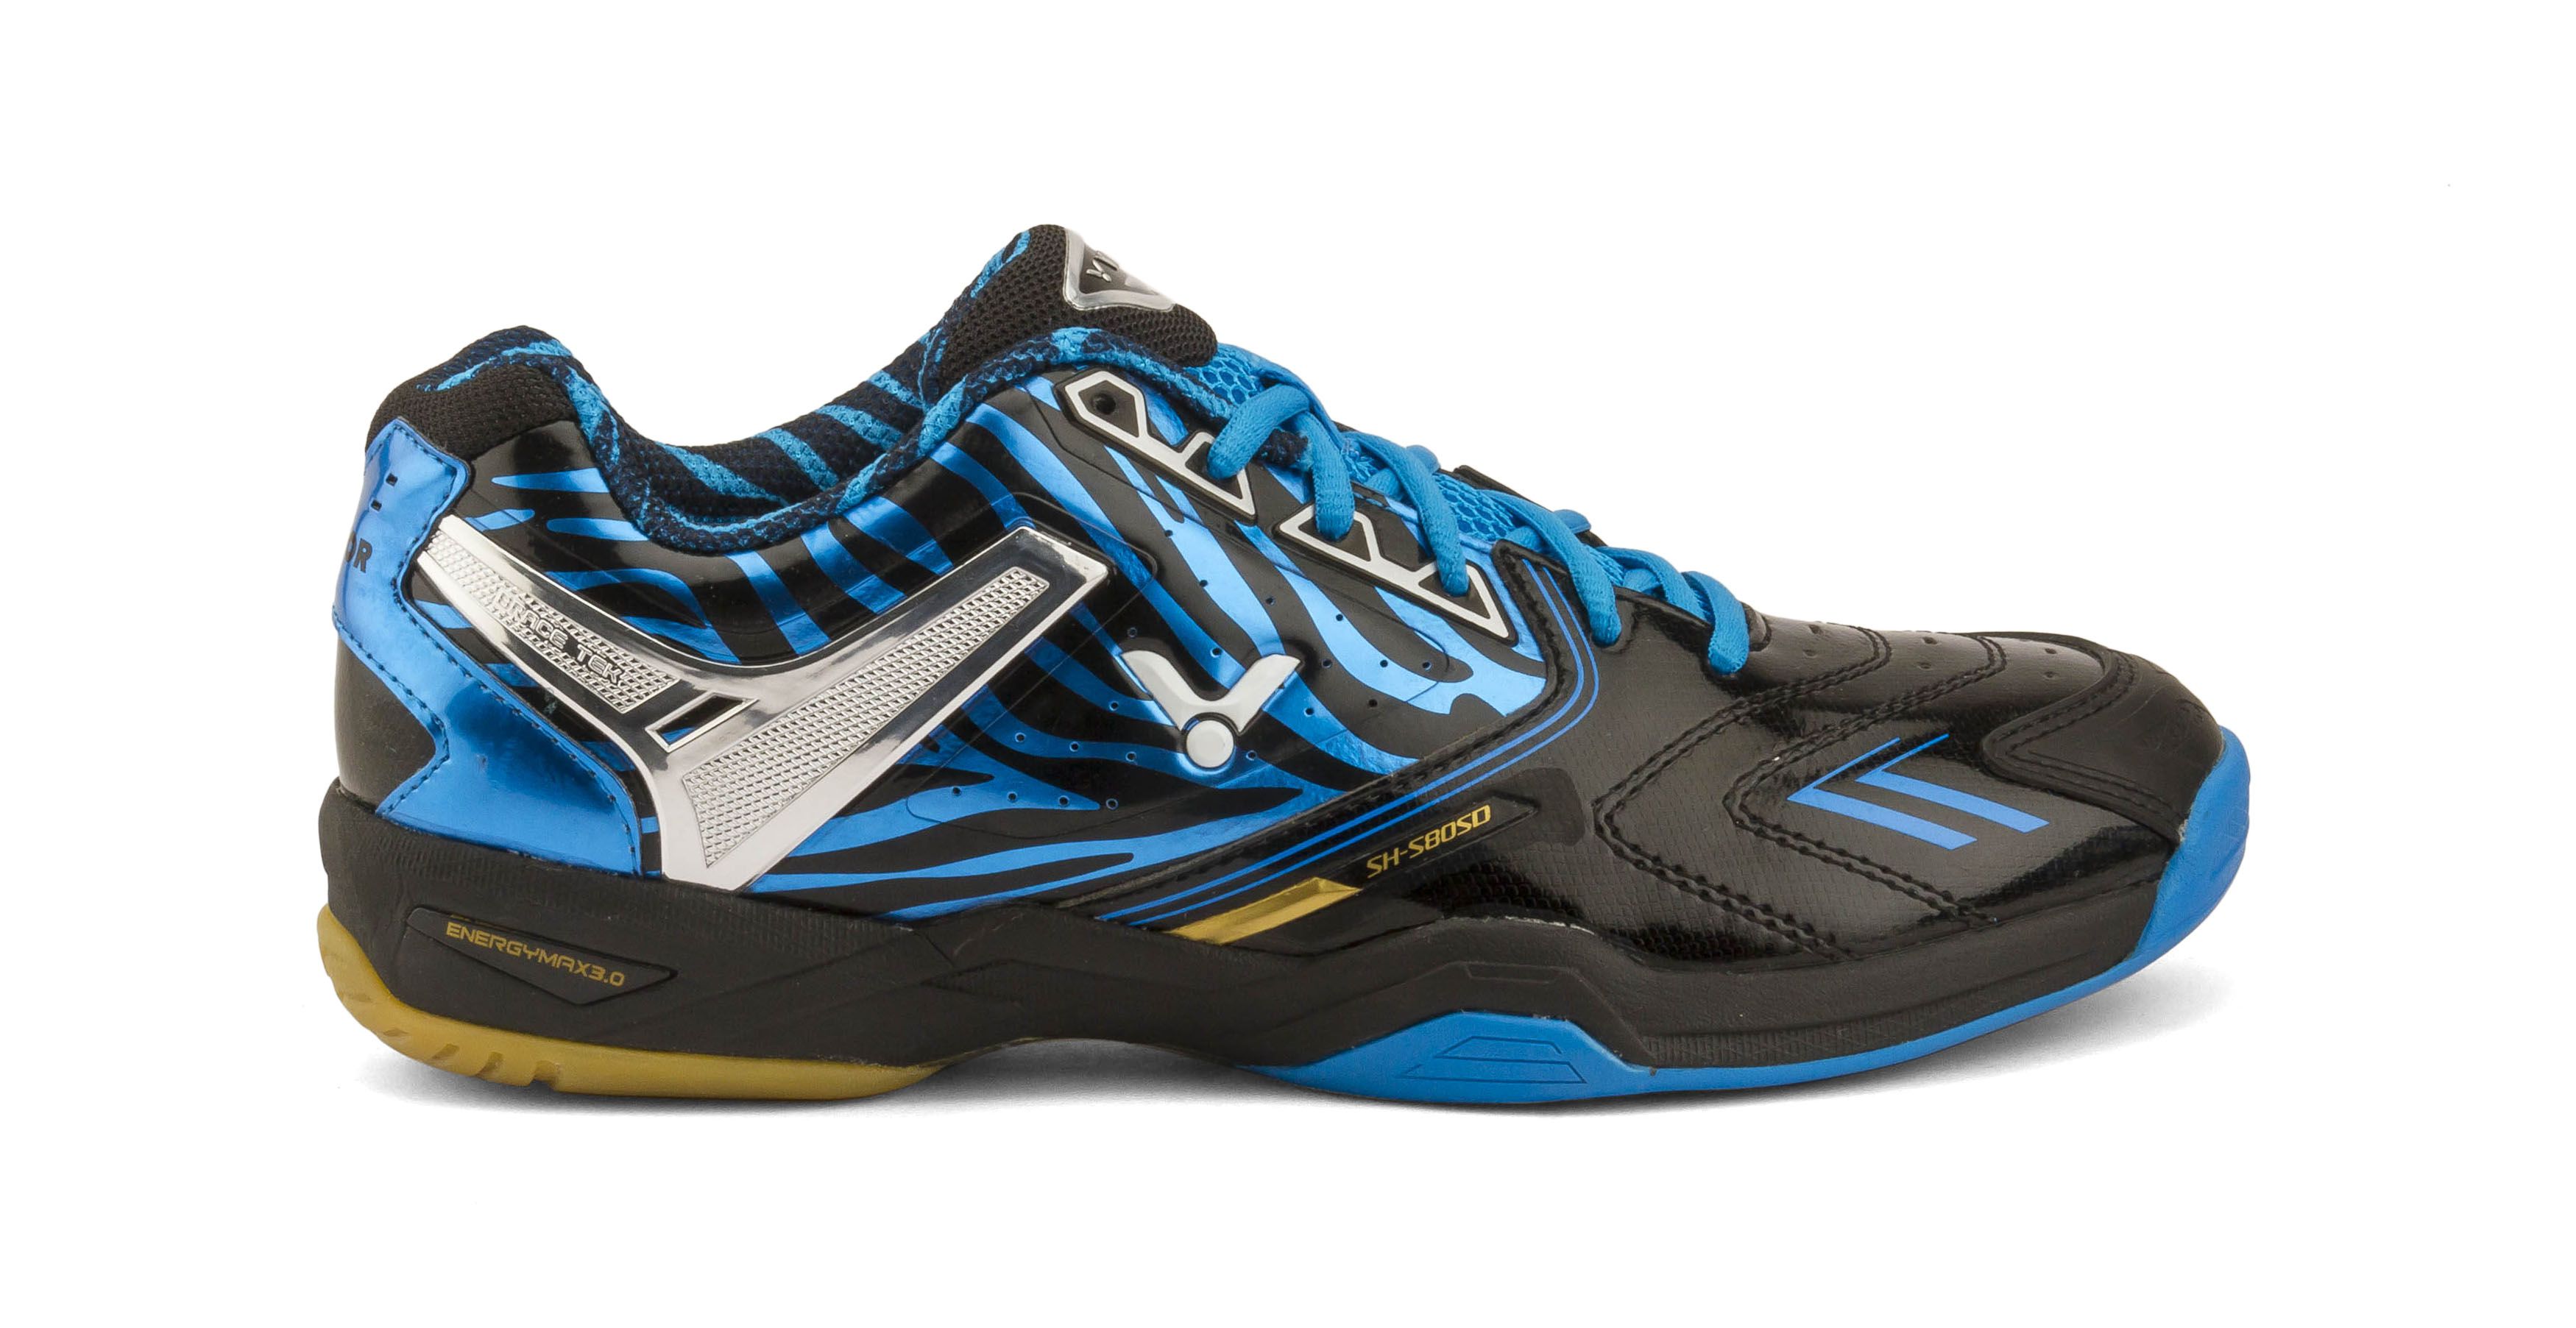 Victor Speed Series SH-S80-SD-F Blue Indoor Court Shoes - Buy Victor ...